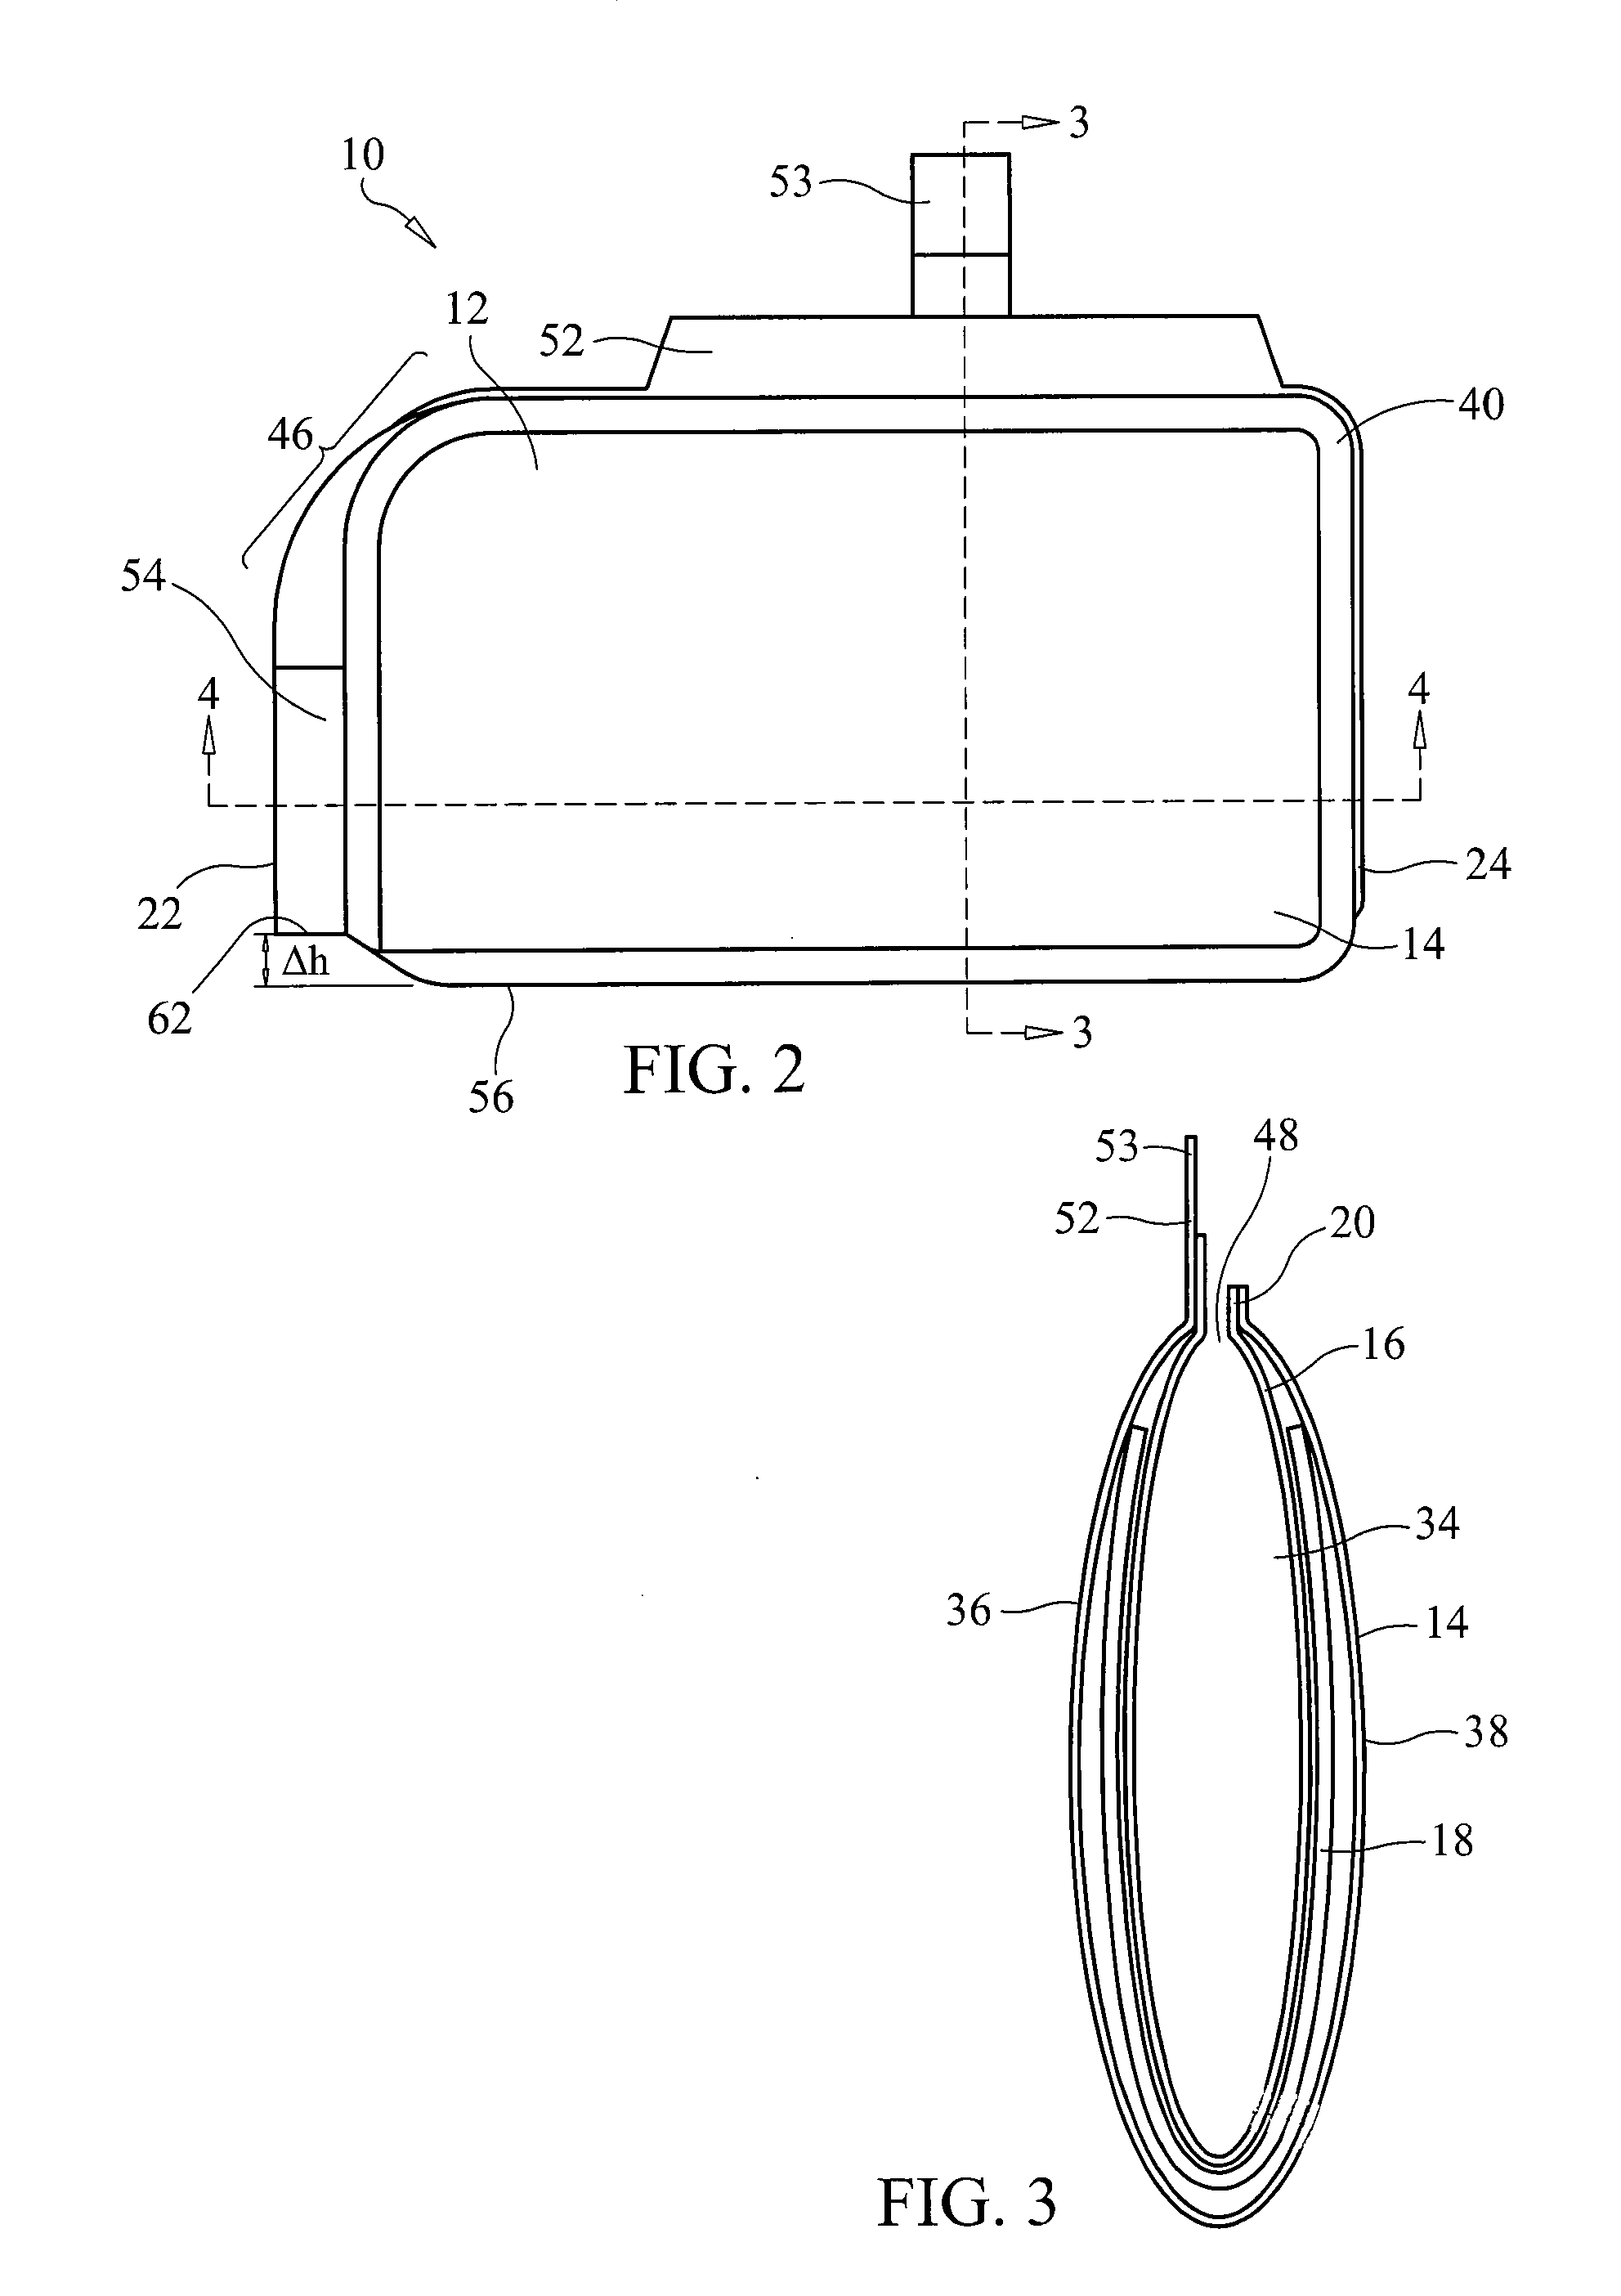 Incontinence device for non-ambulatory males